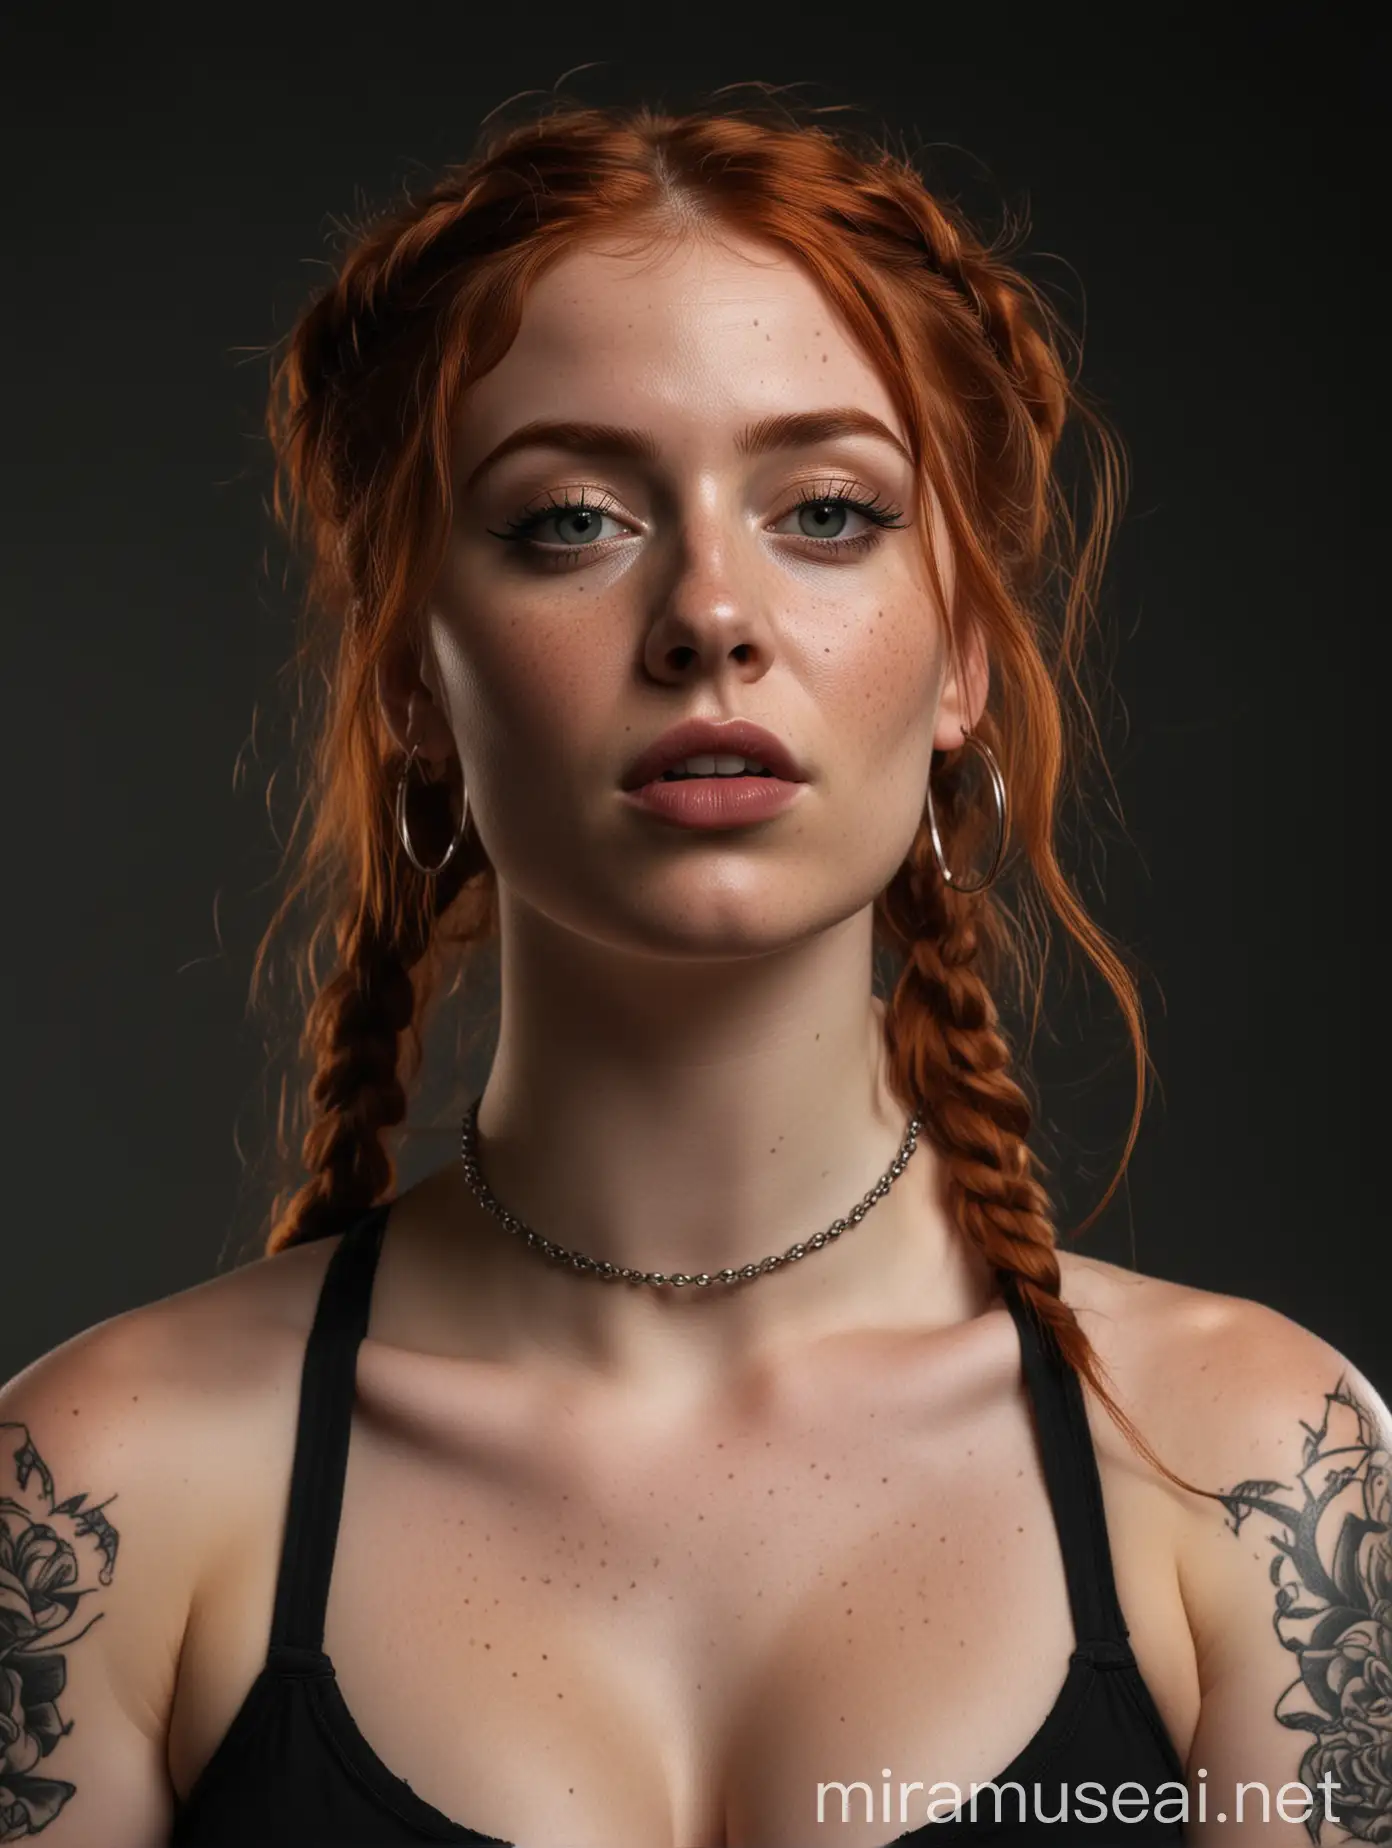 Realistic Renaissance Portrait of Fiery Redhead Woman with Tattoos and Angry Expression